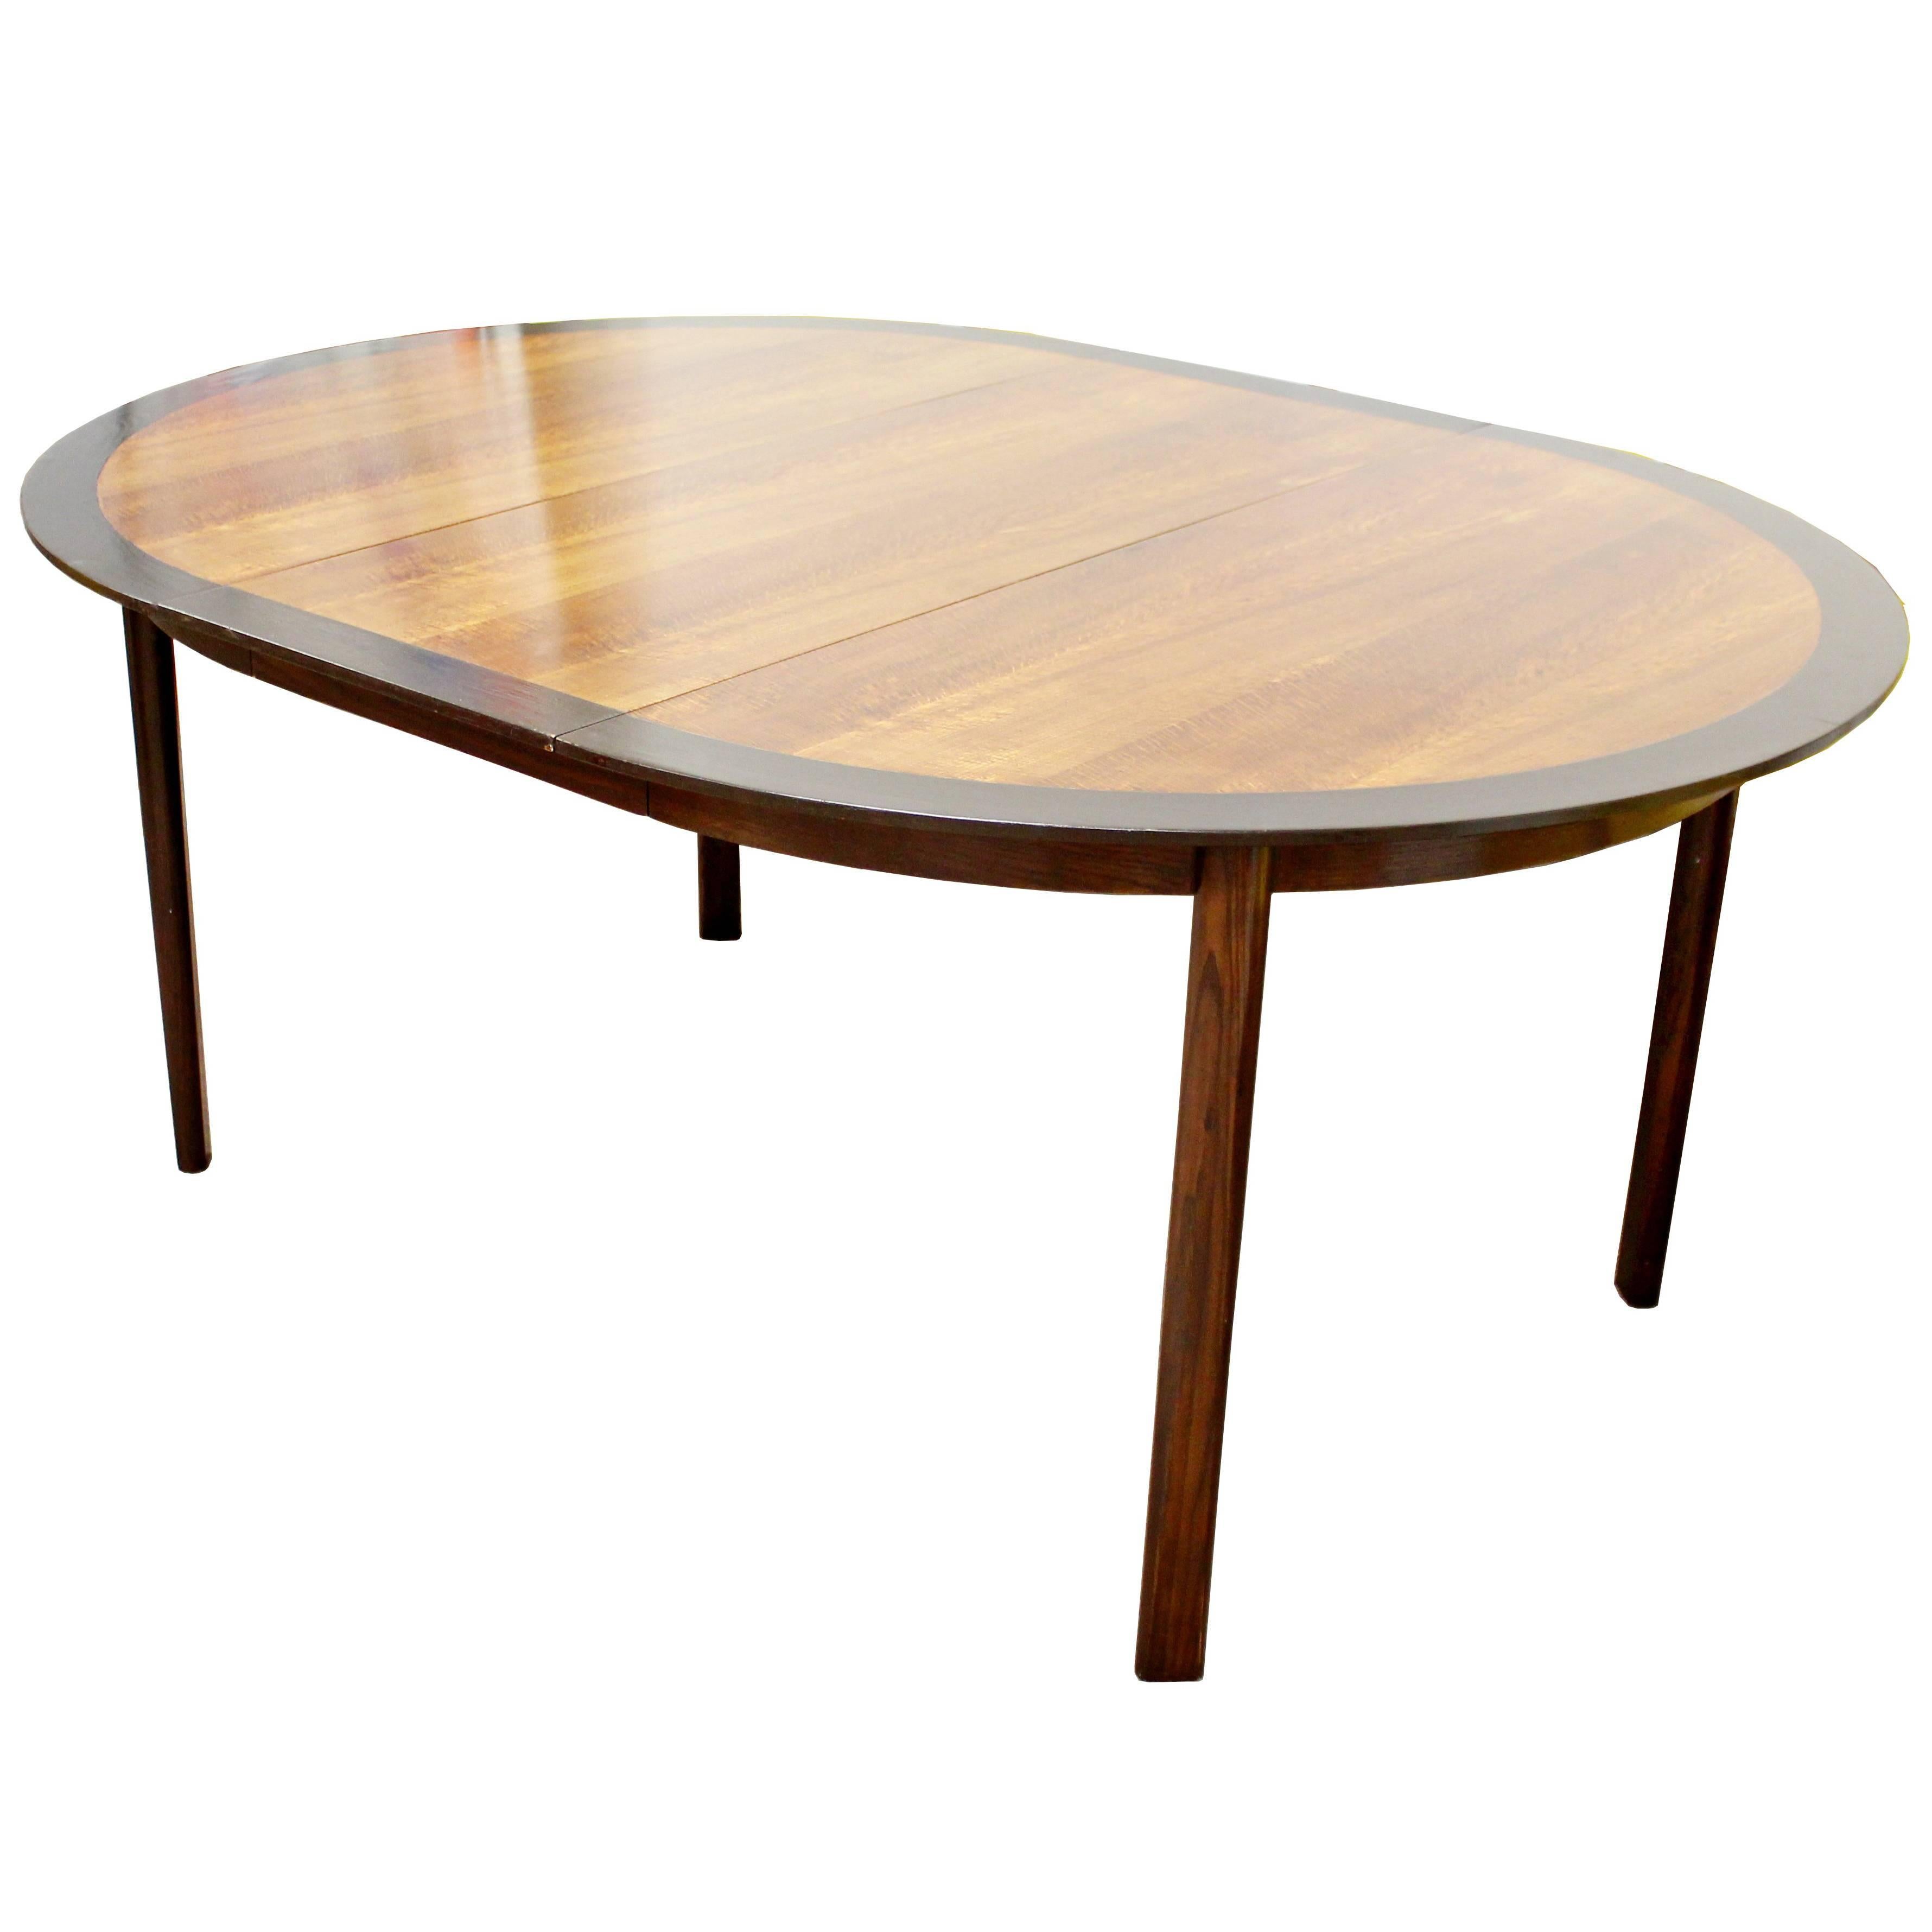 Mid-Century Modern Mahogany Oval Extendable Dining Table and Leafs by Dunbar